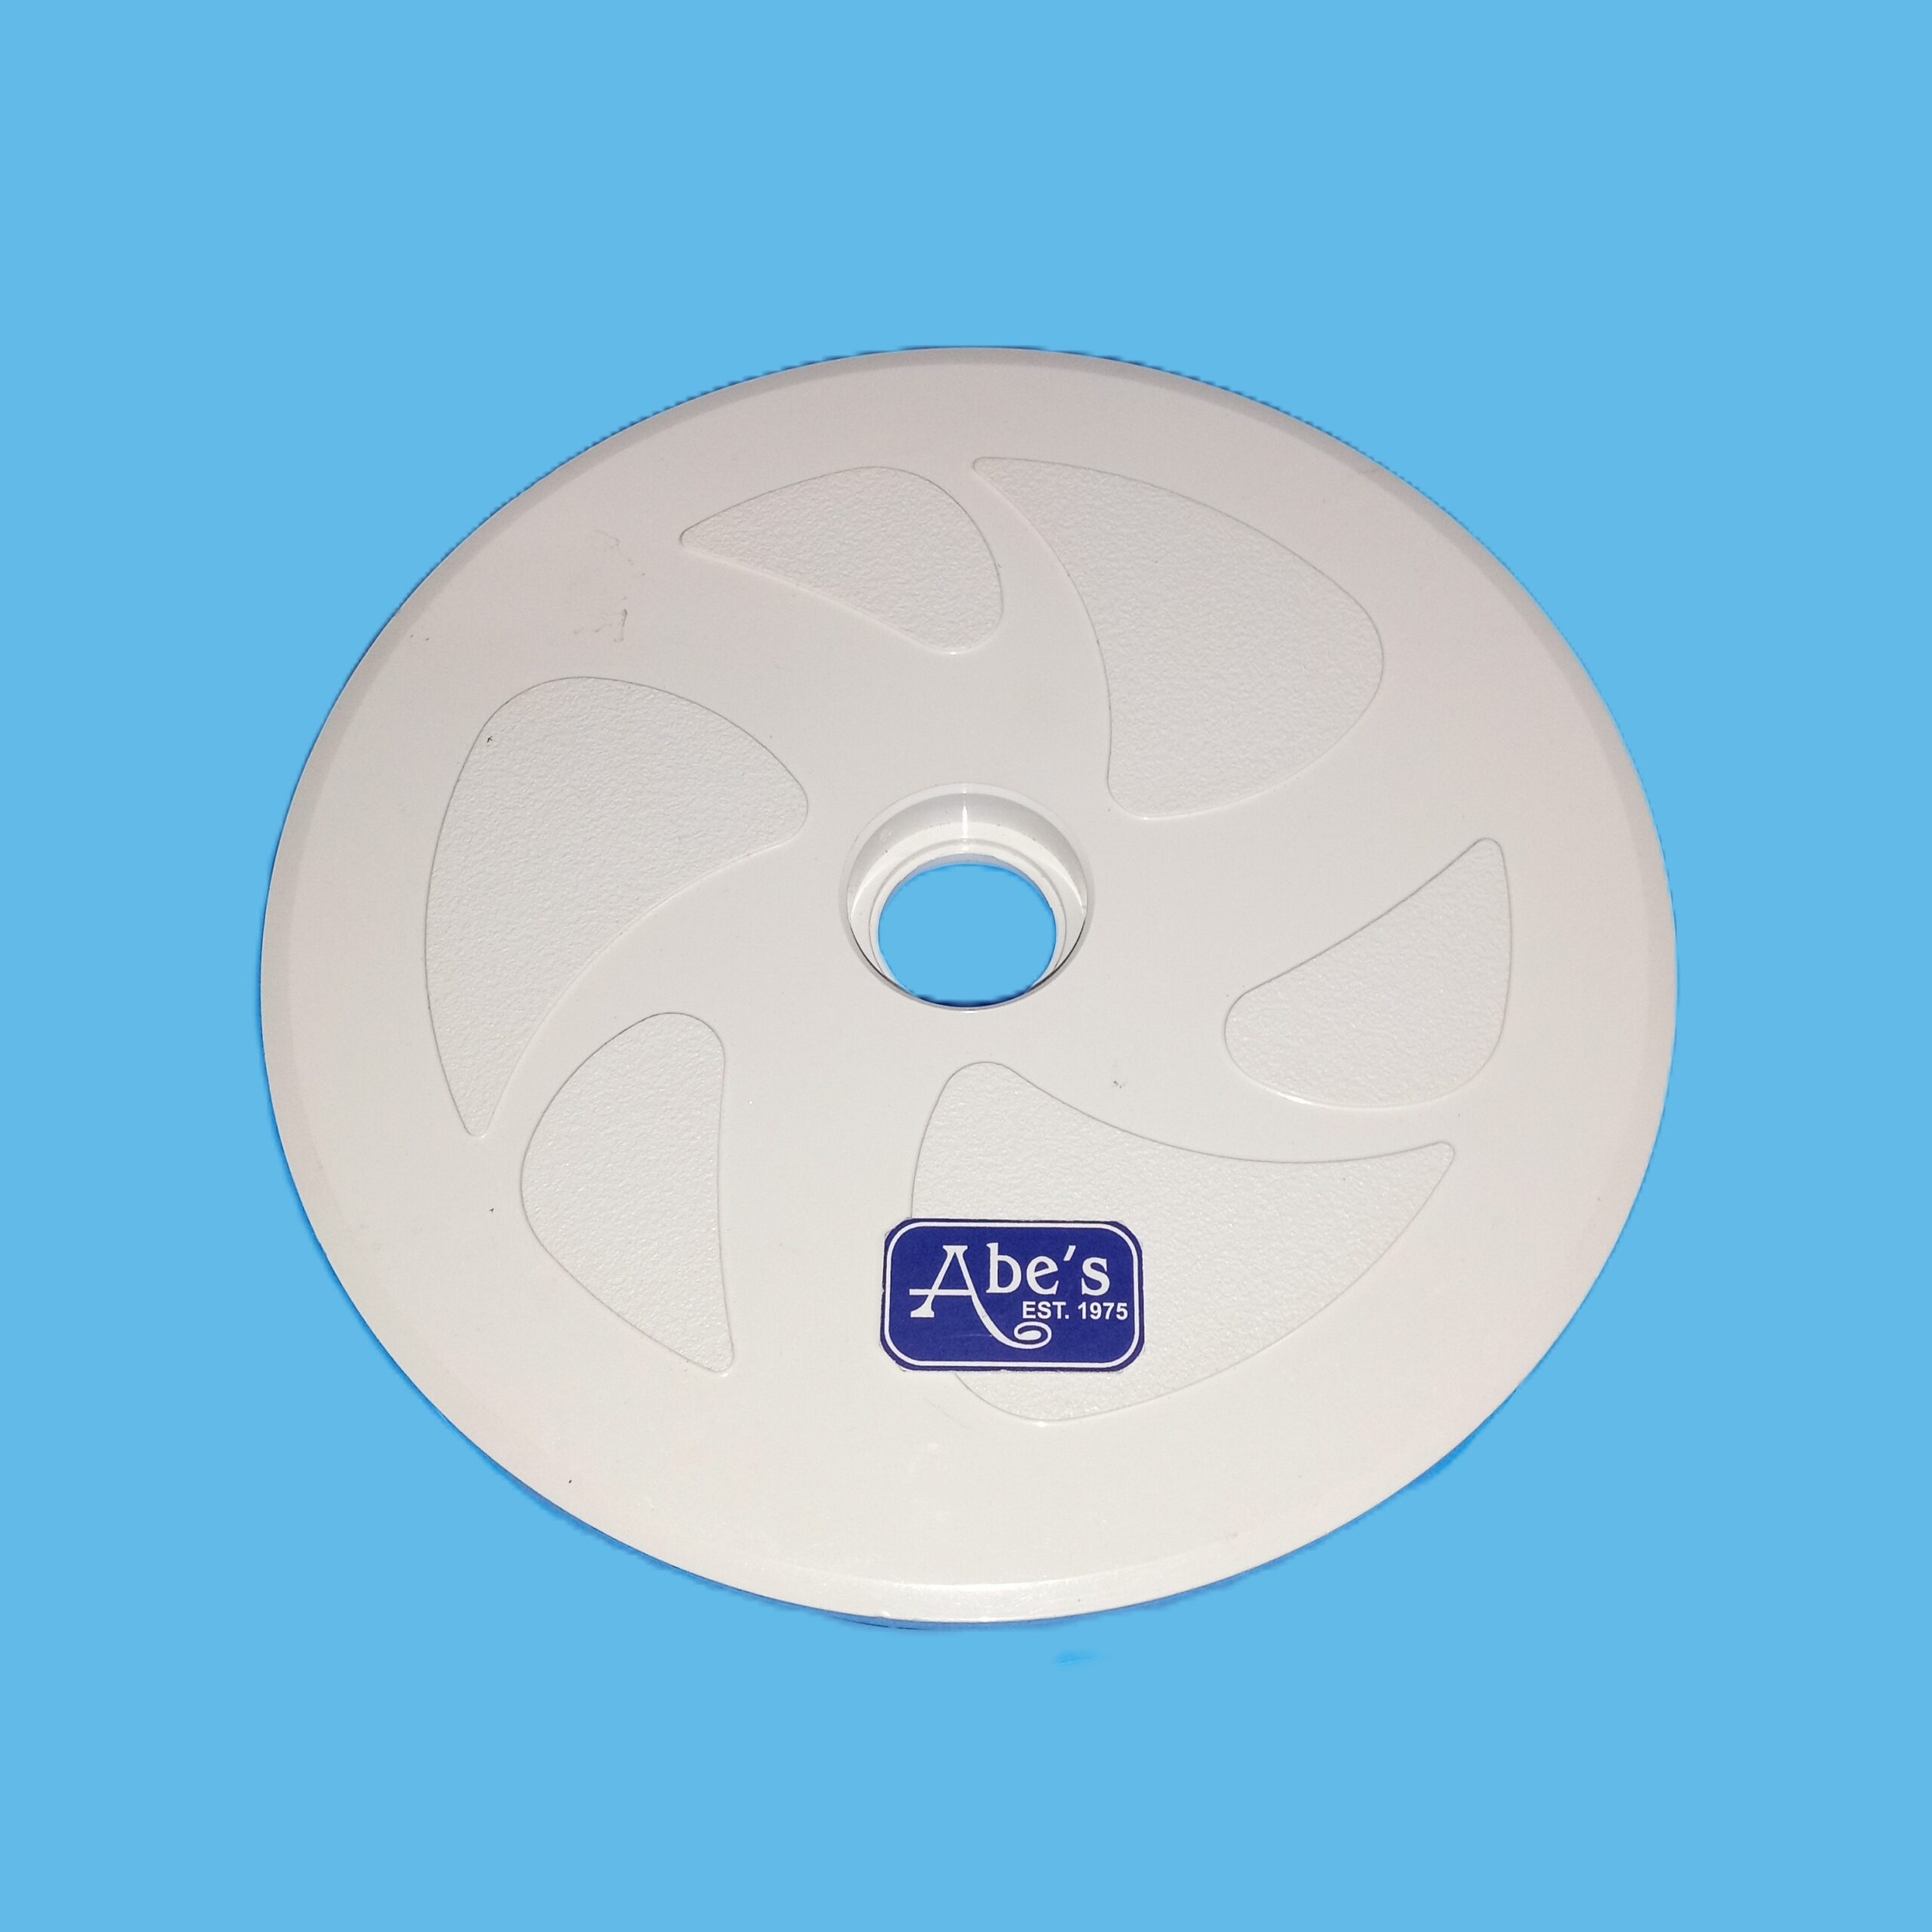 Polaris Large Replacement Wheel for 180/280 Cleaners / C6 / Affordable $16.75 / Hard to Find Sample Taxonomy Title? Find Hard to Find Parts at Abe's Pools & Spas